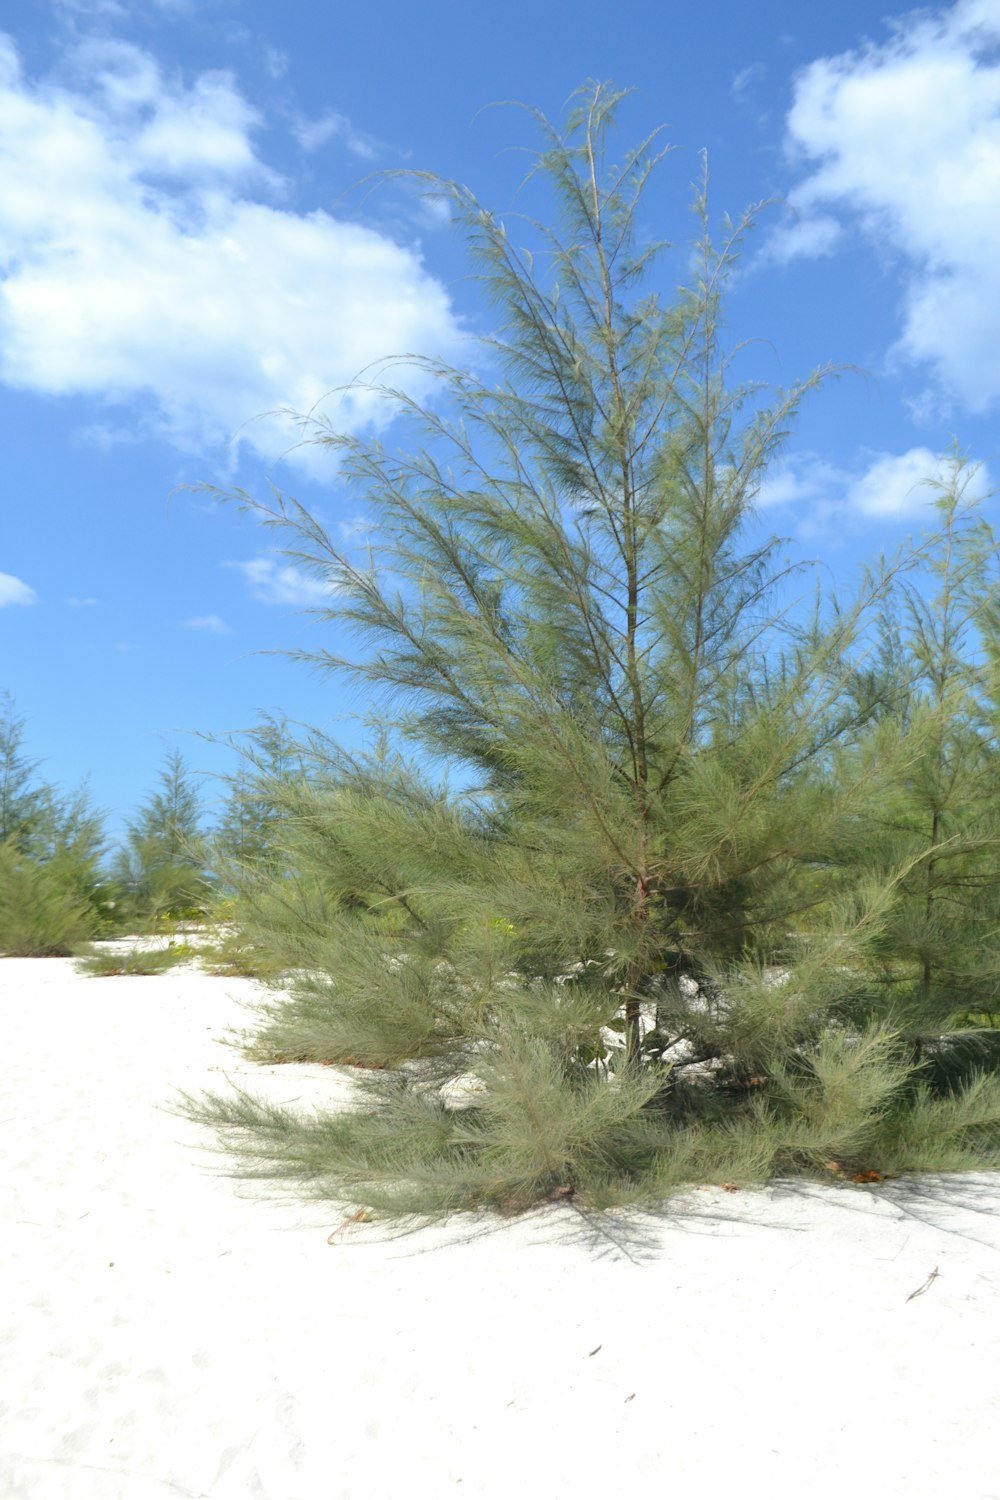 a small pine tree in the middle of a sandy area